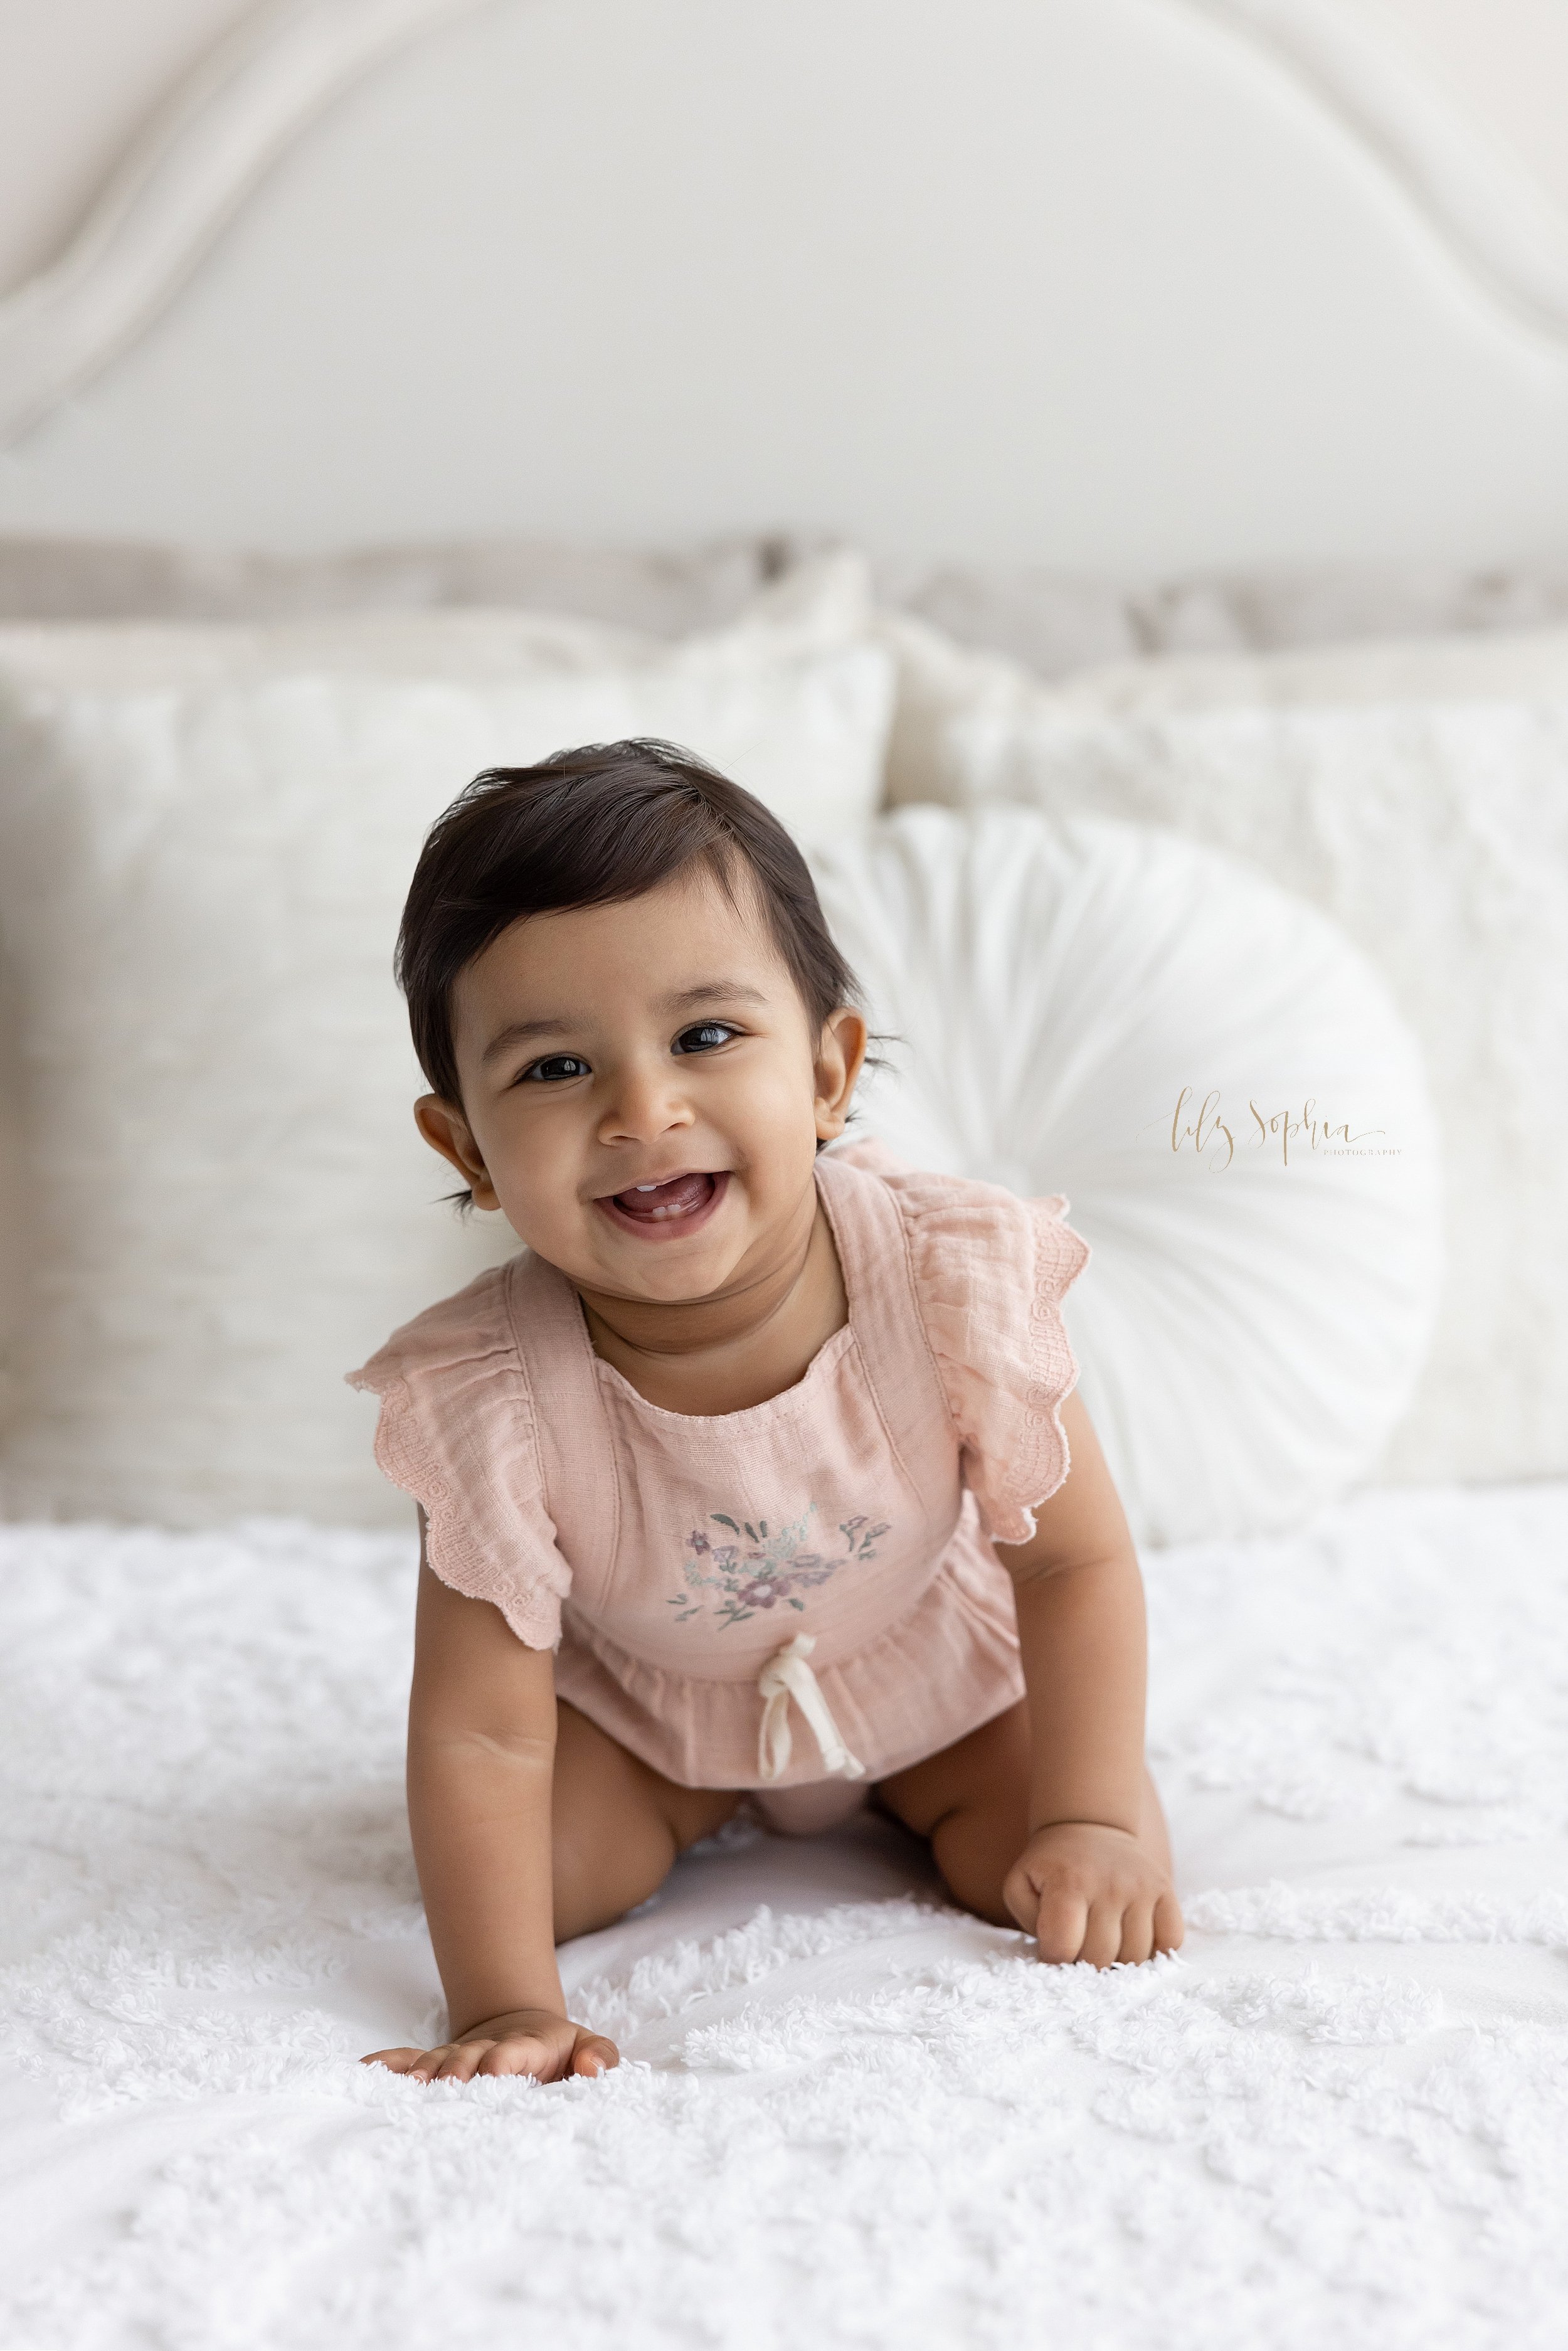  Close-up first birthday portrait of a smiling one year old Indian girl as she crawls on a bed showing her baby teeth taken near Poncey Highlands in Atlanta in a studio using natural light. 